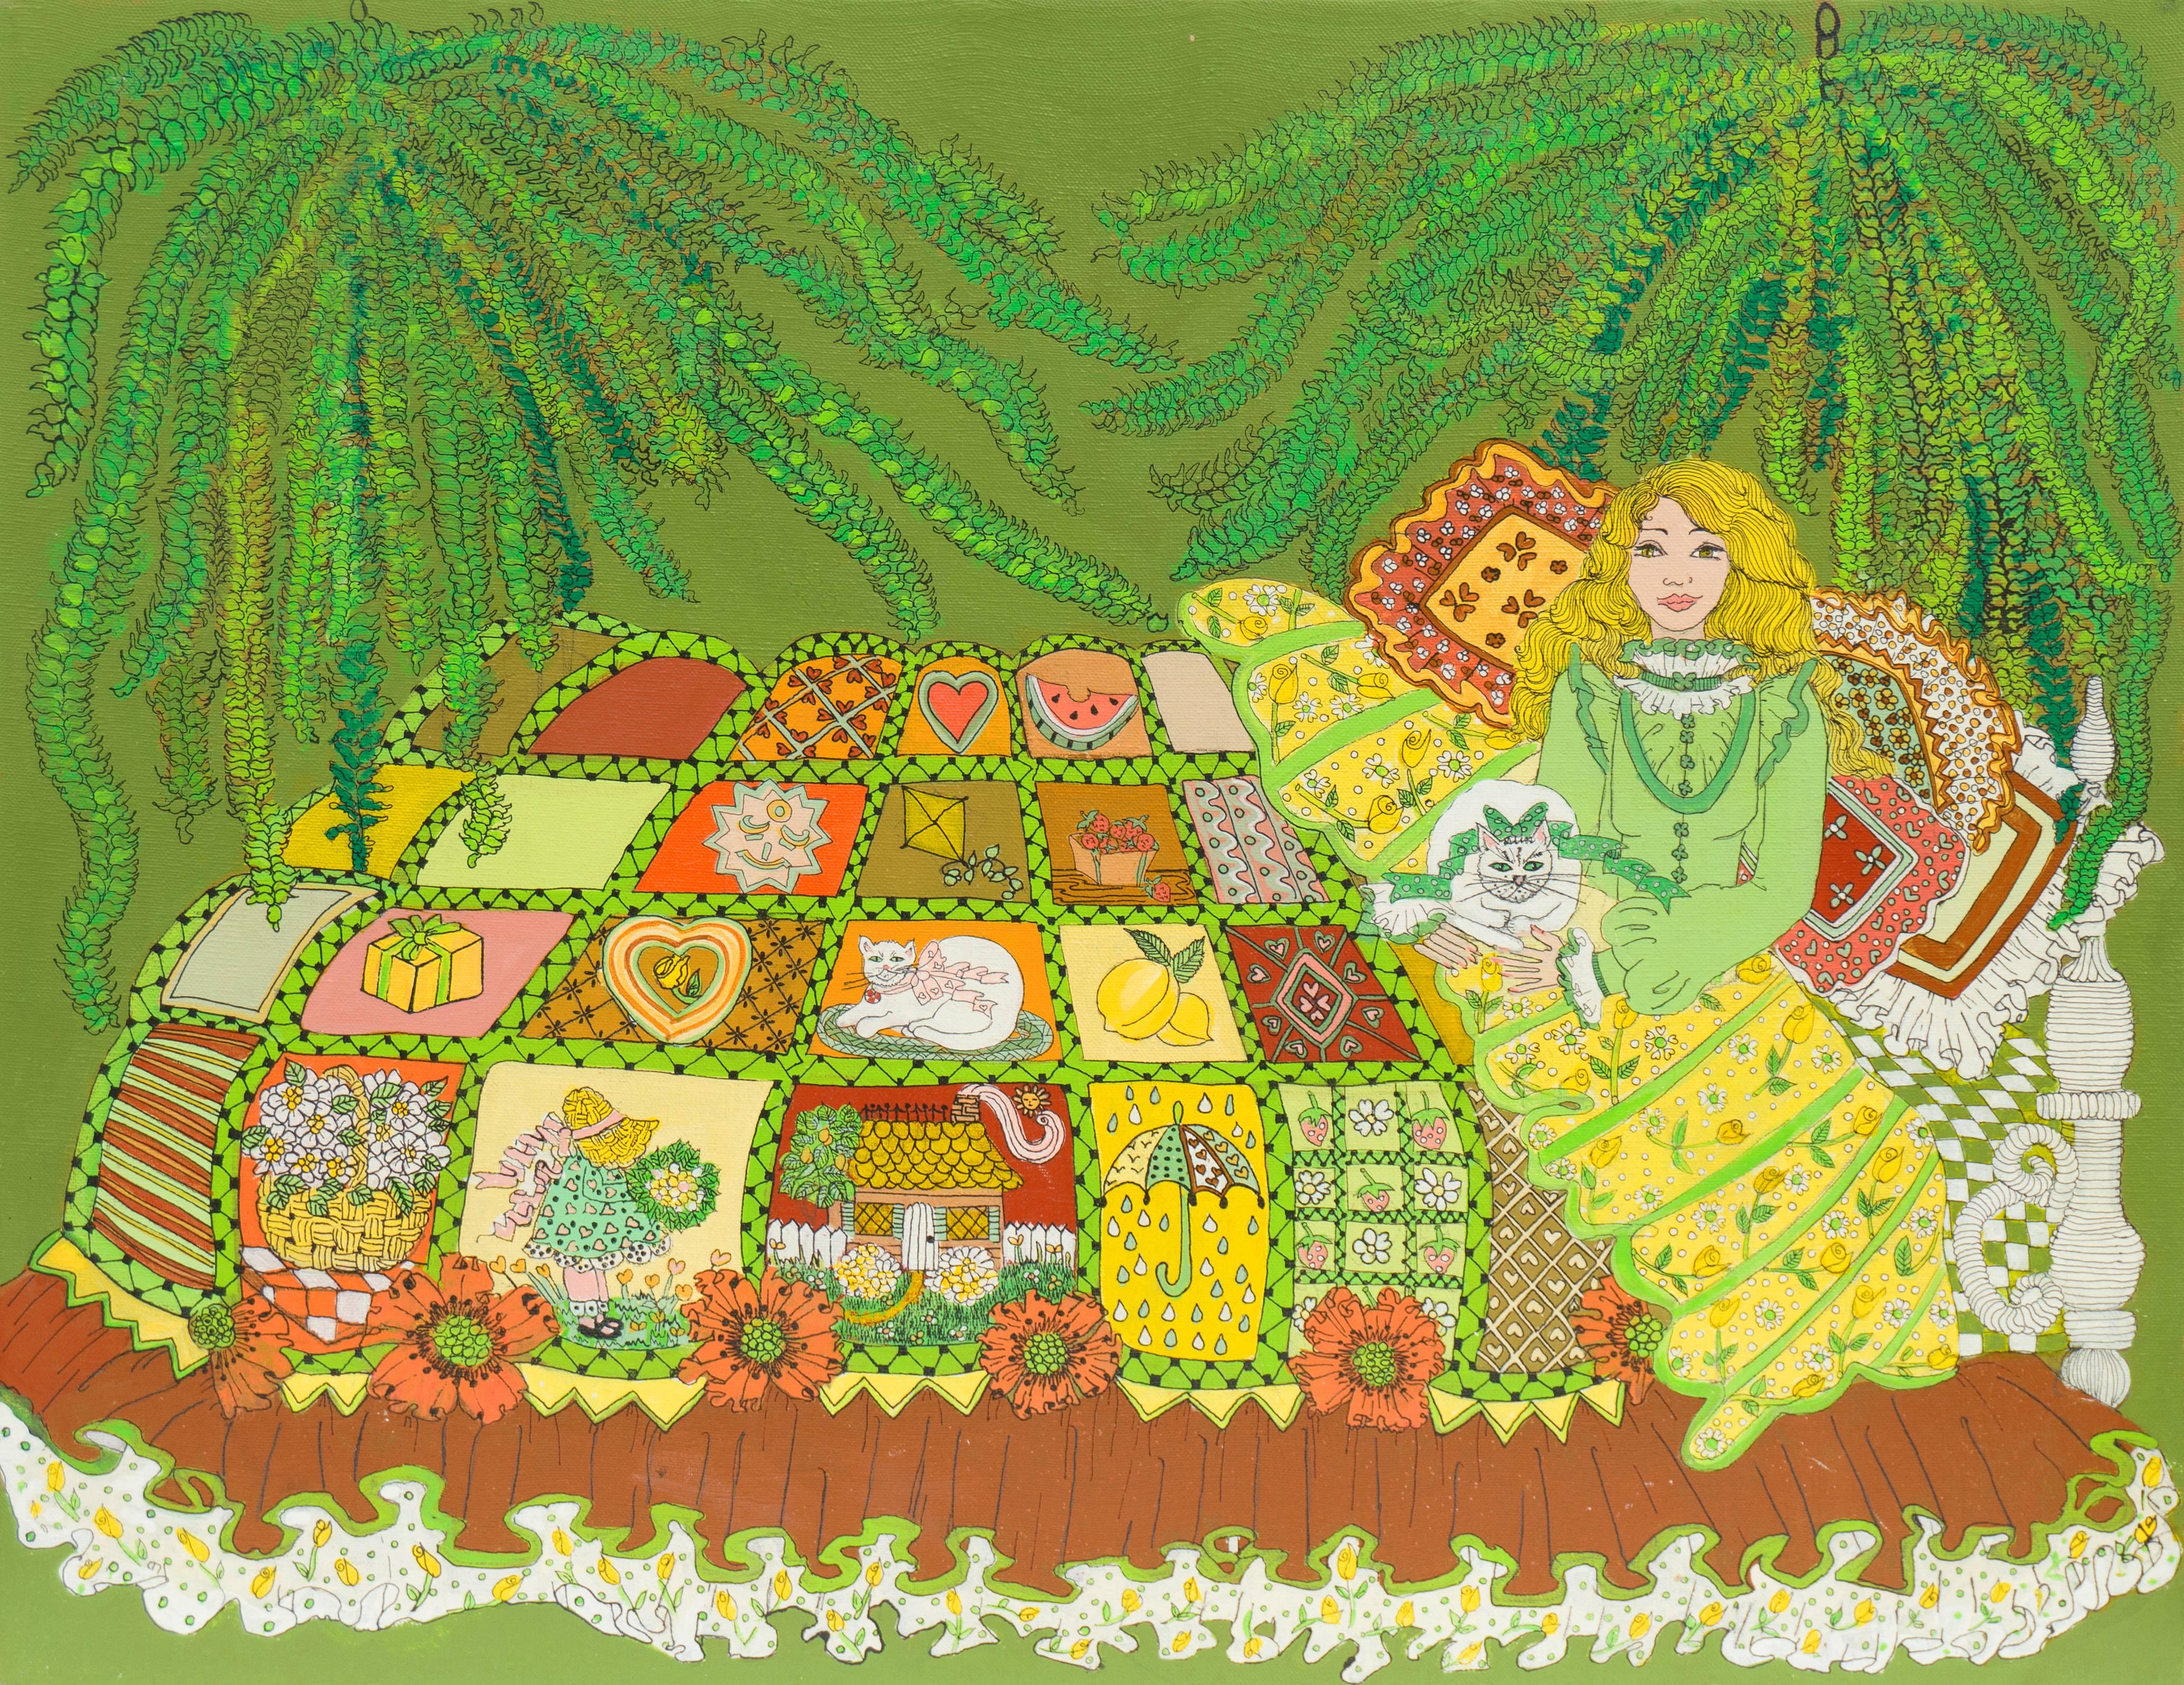 Diane Devine Interior Painting - 'The Quilted Bed', San Francisco Woman Artist